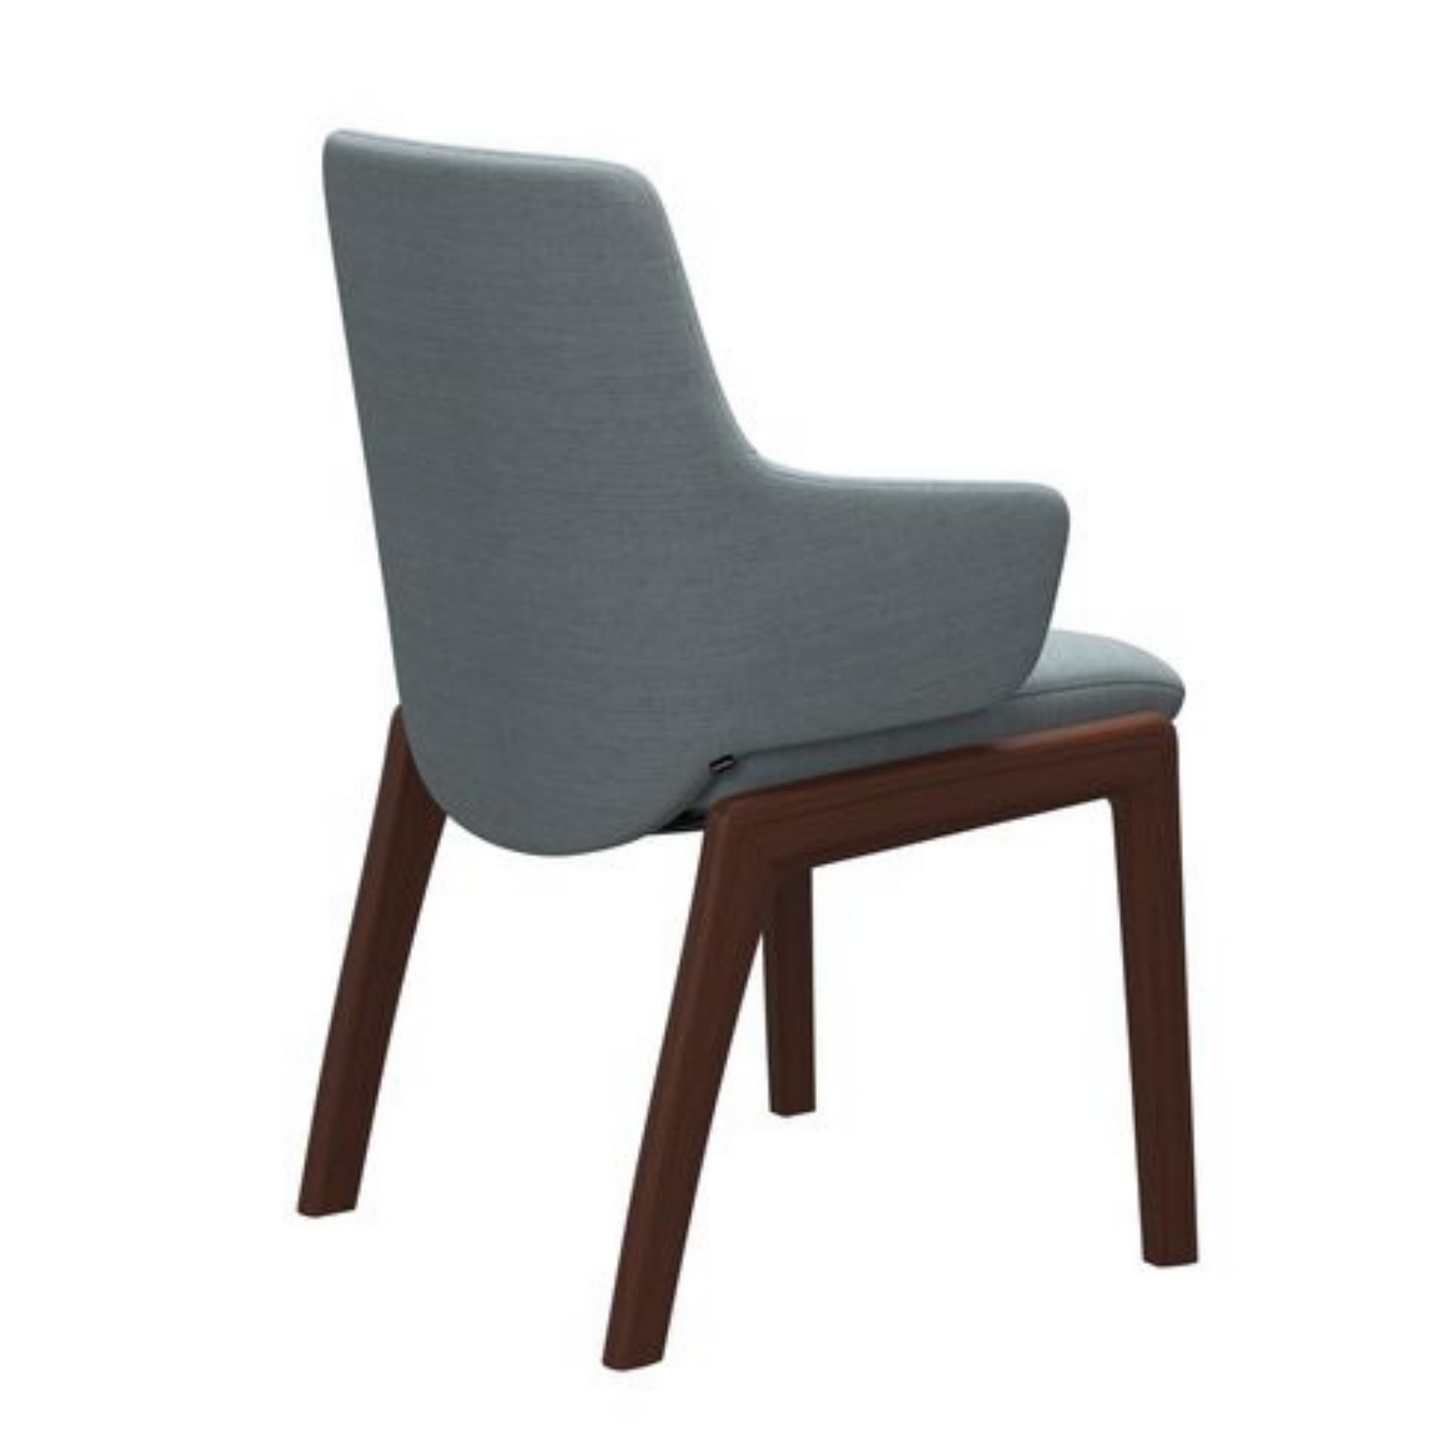 Laurel Dining Chair with Arms D100 Leg by Stressless